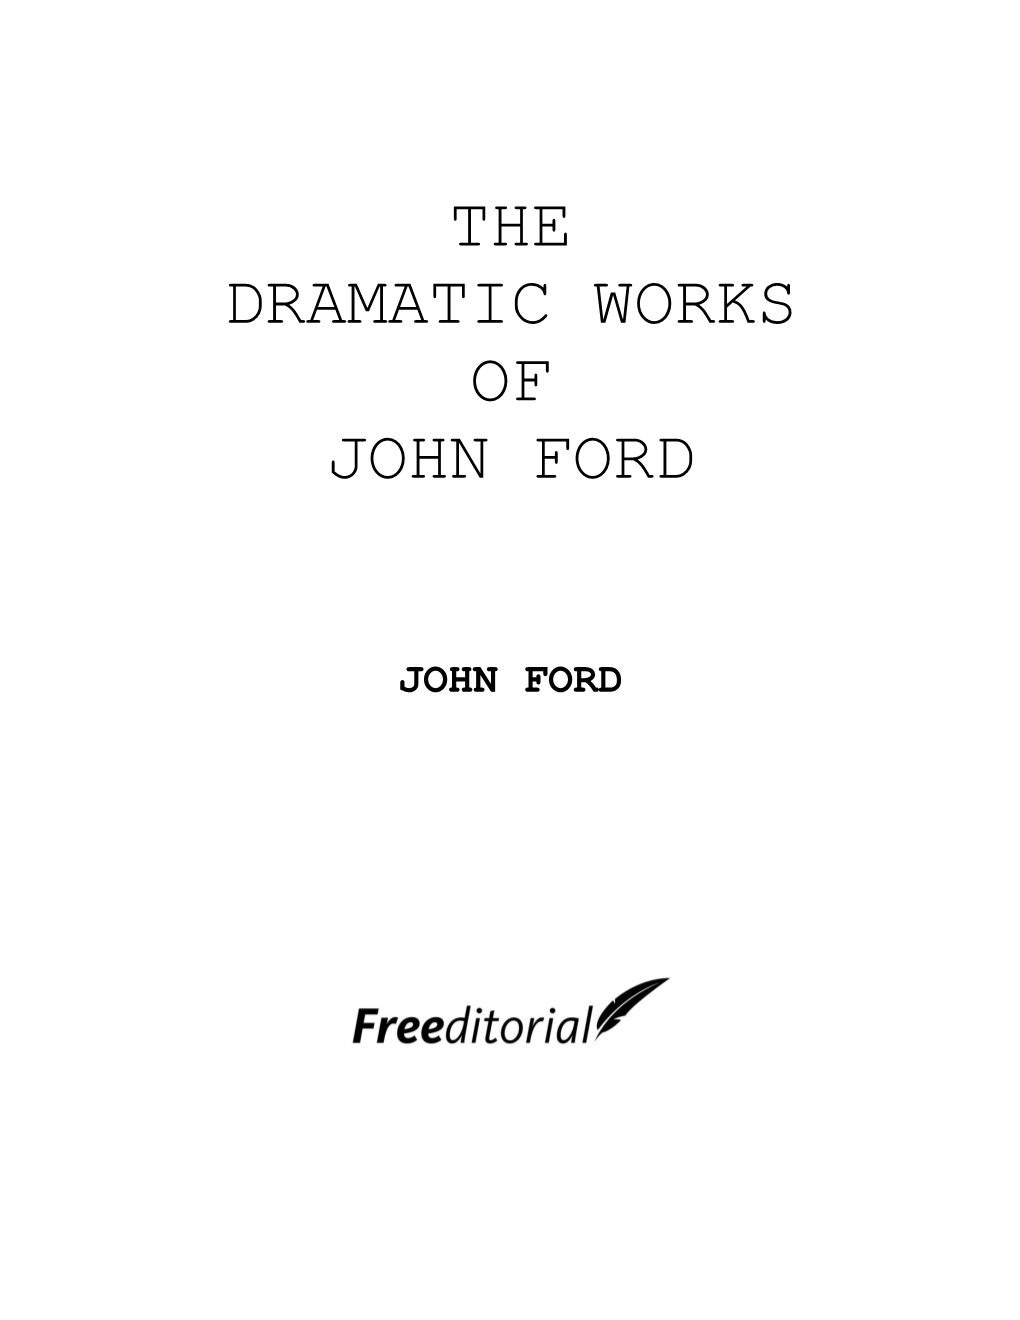 The Dramatic Works Ofjohn Ford